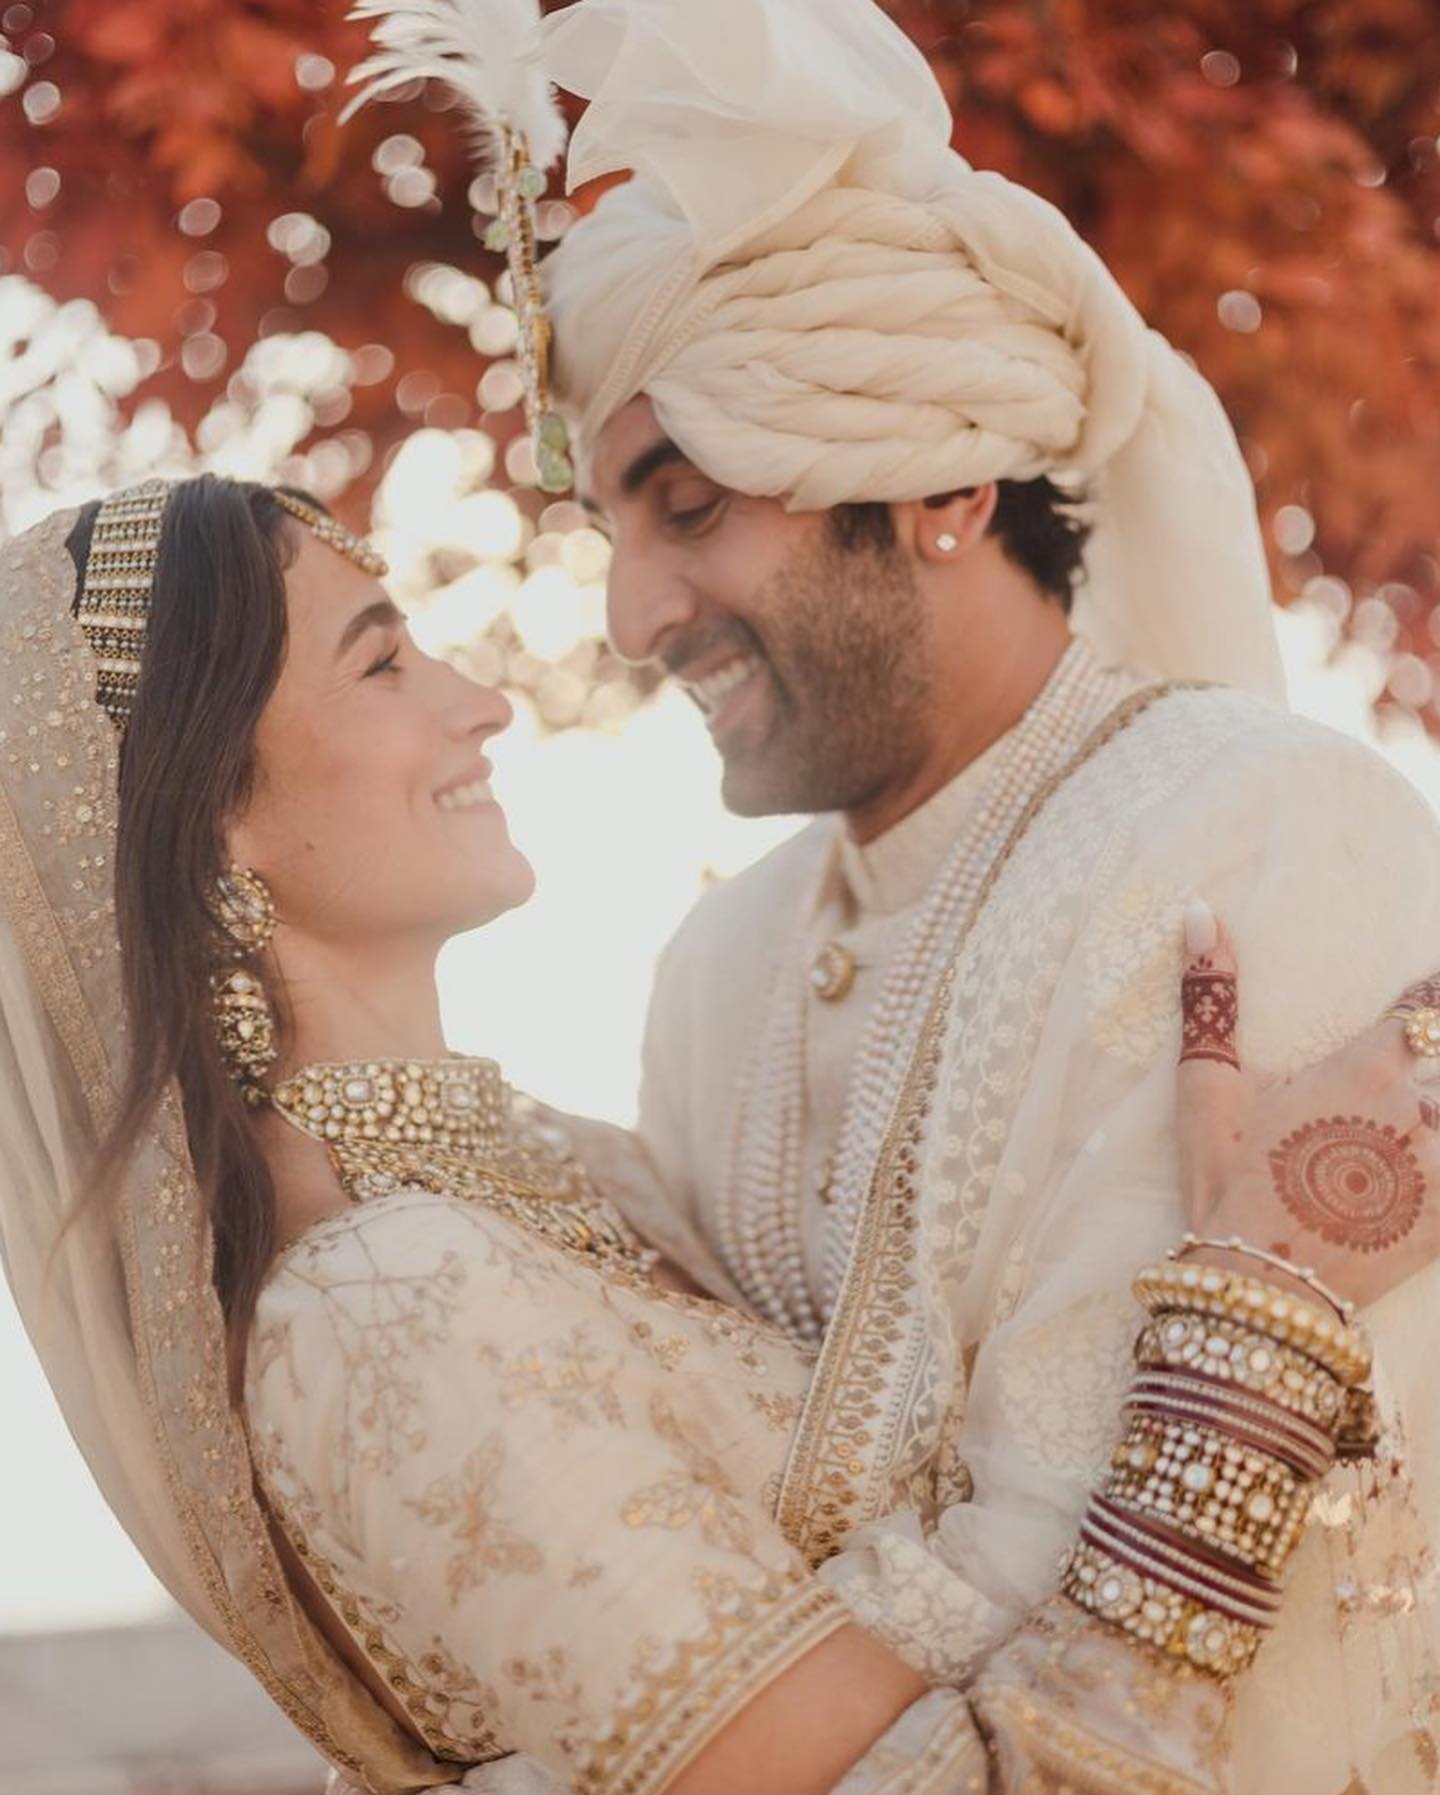 25 Note-Worthy Wedding Trends We Spotted In 2022